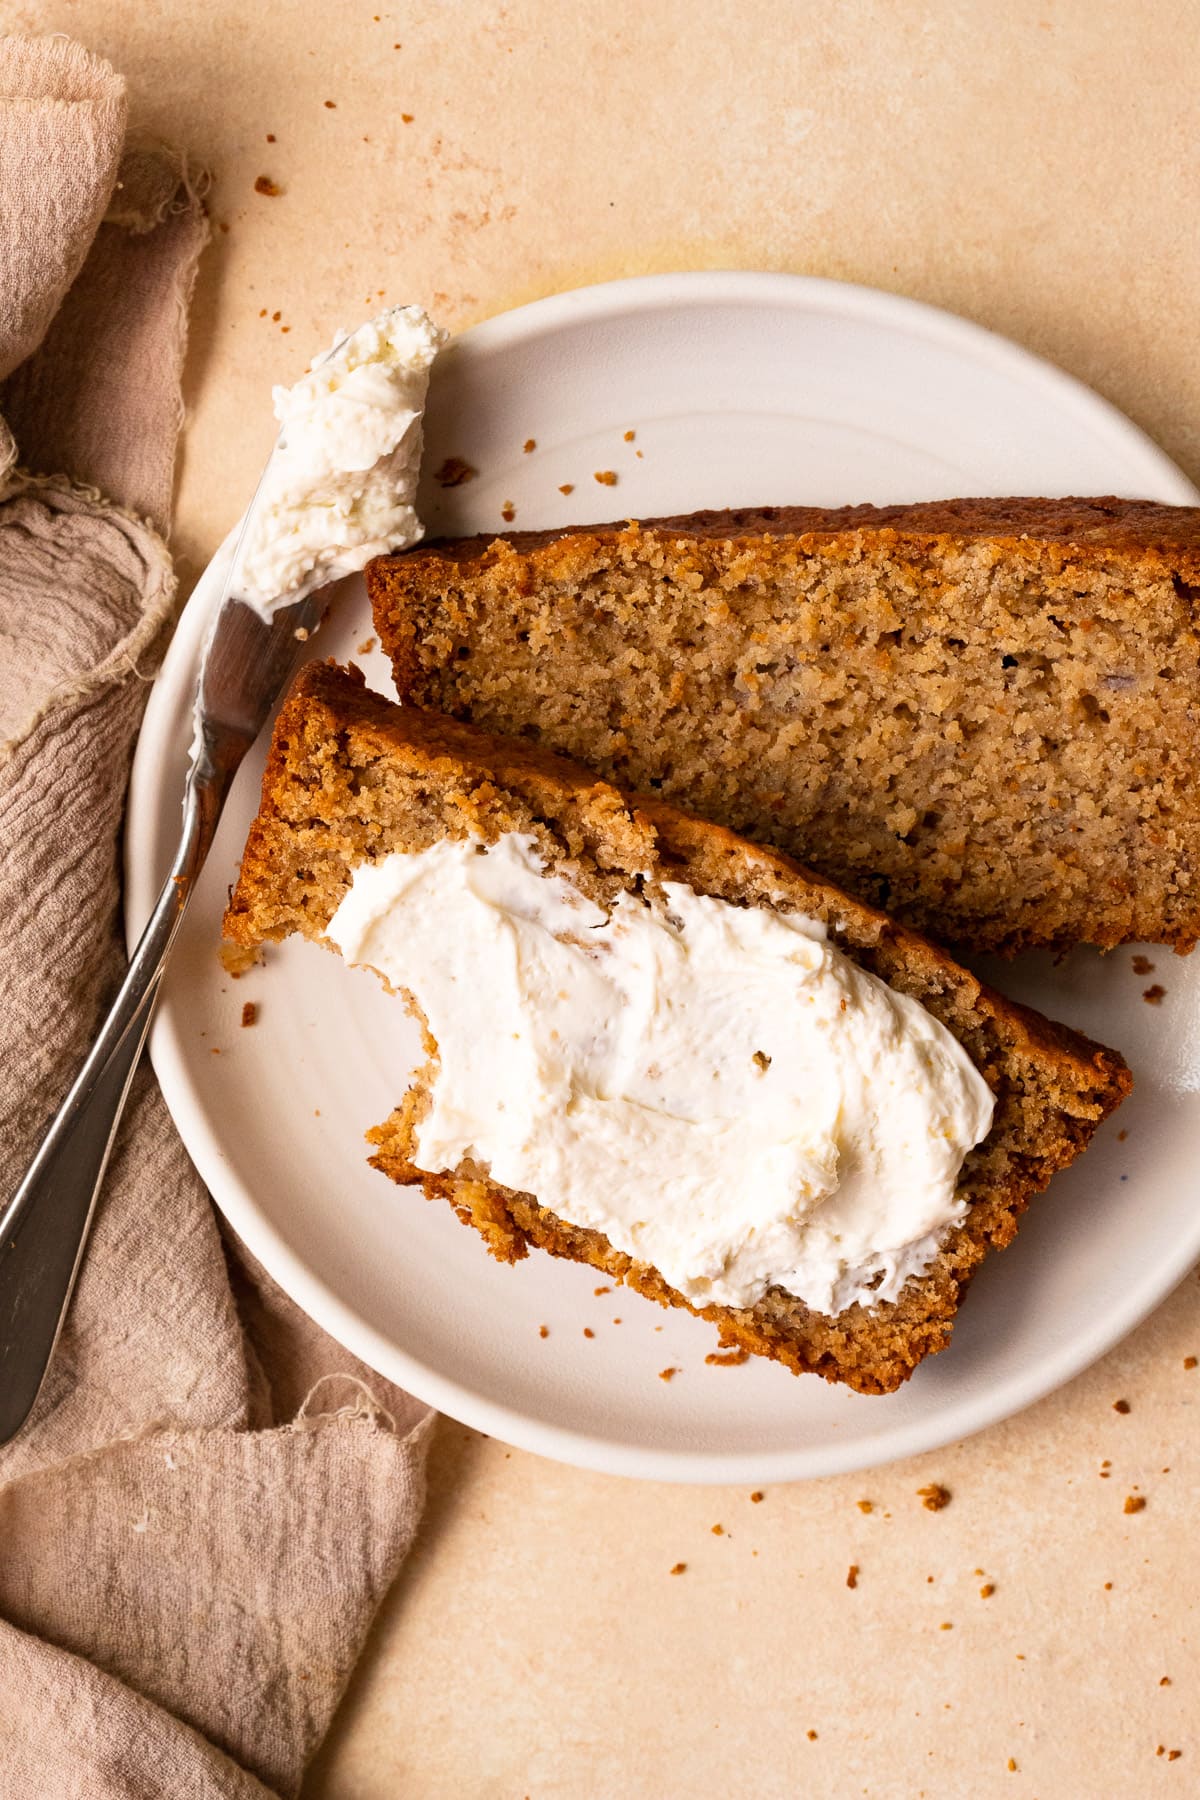 Sliced banana bread topped with whipped cream cheese.